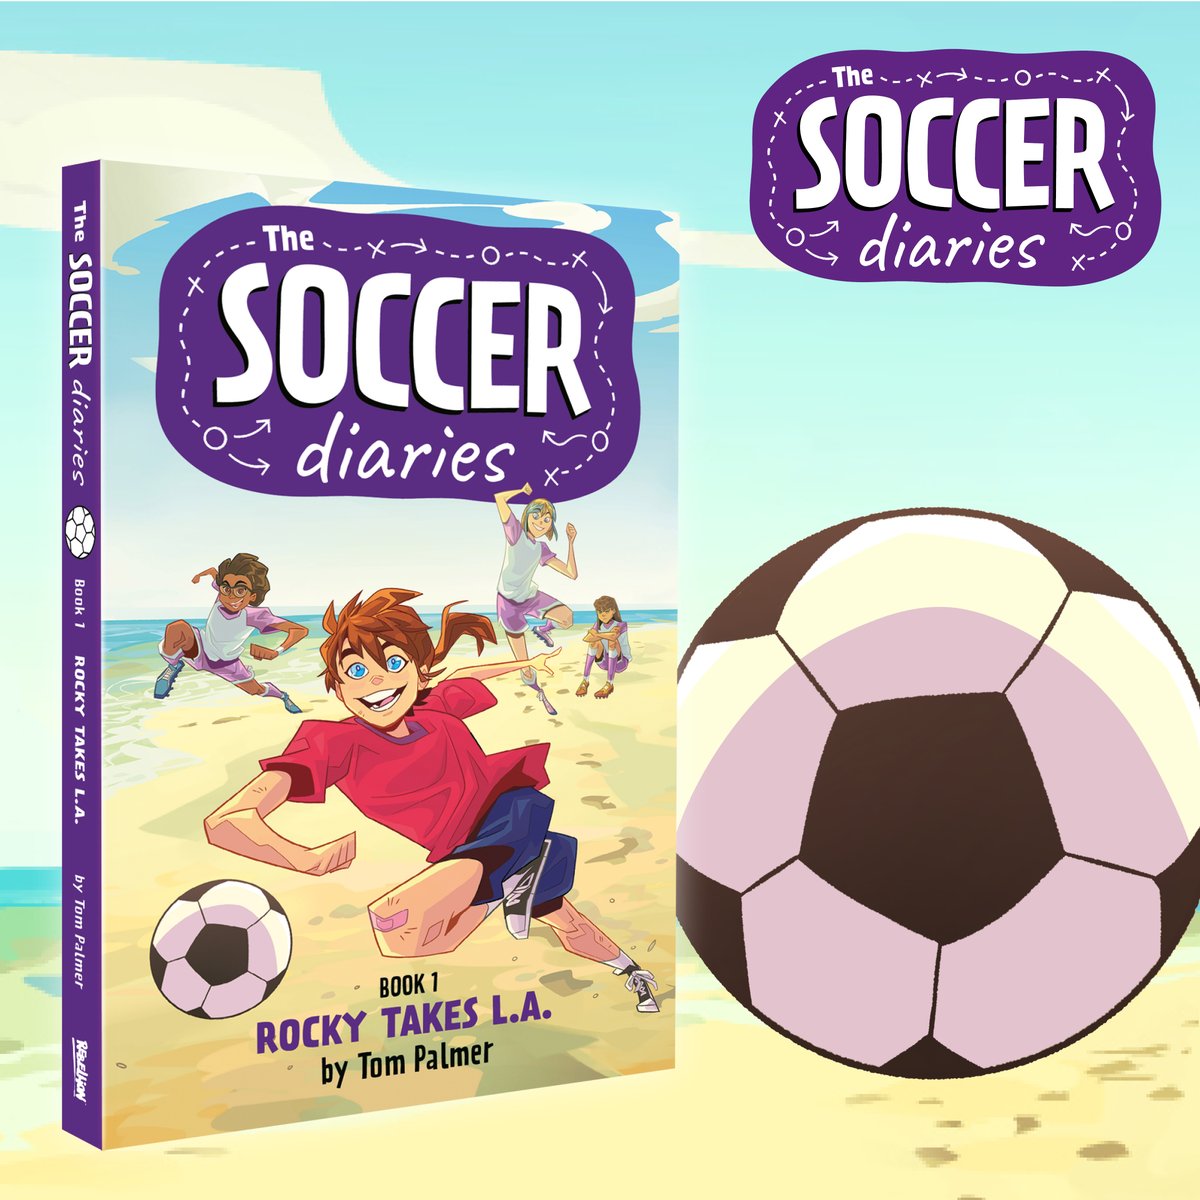 It's been just over a month now since we've launched #TheSoccerDiaries, and we're thrilled to hear you love, #love, love this new series! What's been your favourite moment from Book 1 - Rocky Takes L.A. so far? Start the series now: reb.to/TheSoccerDiari…